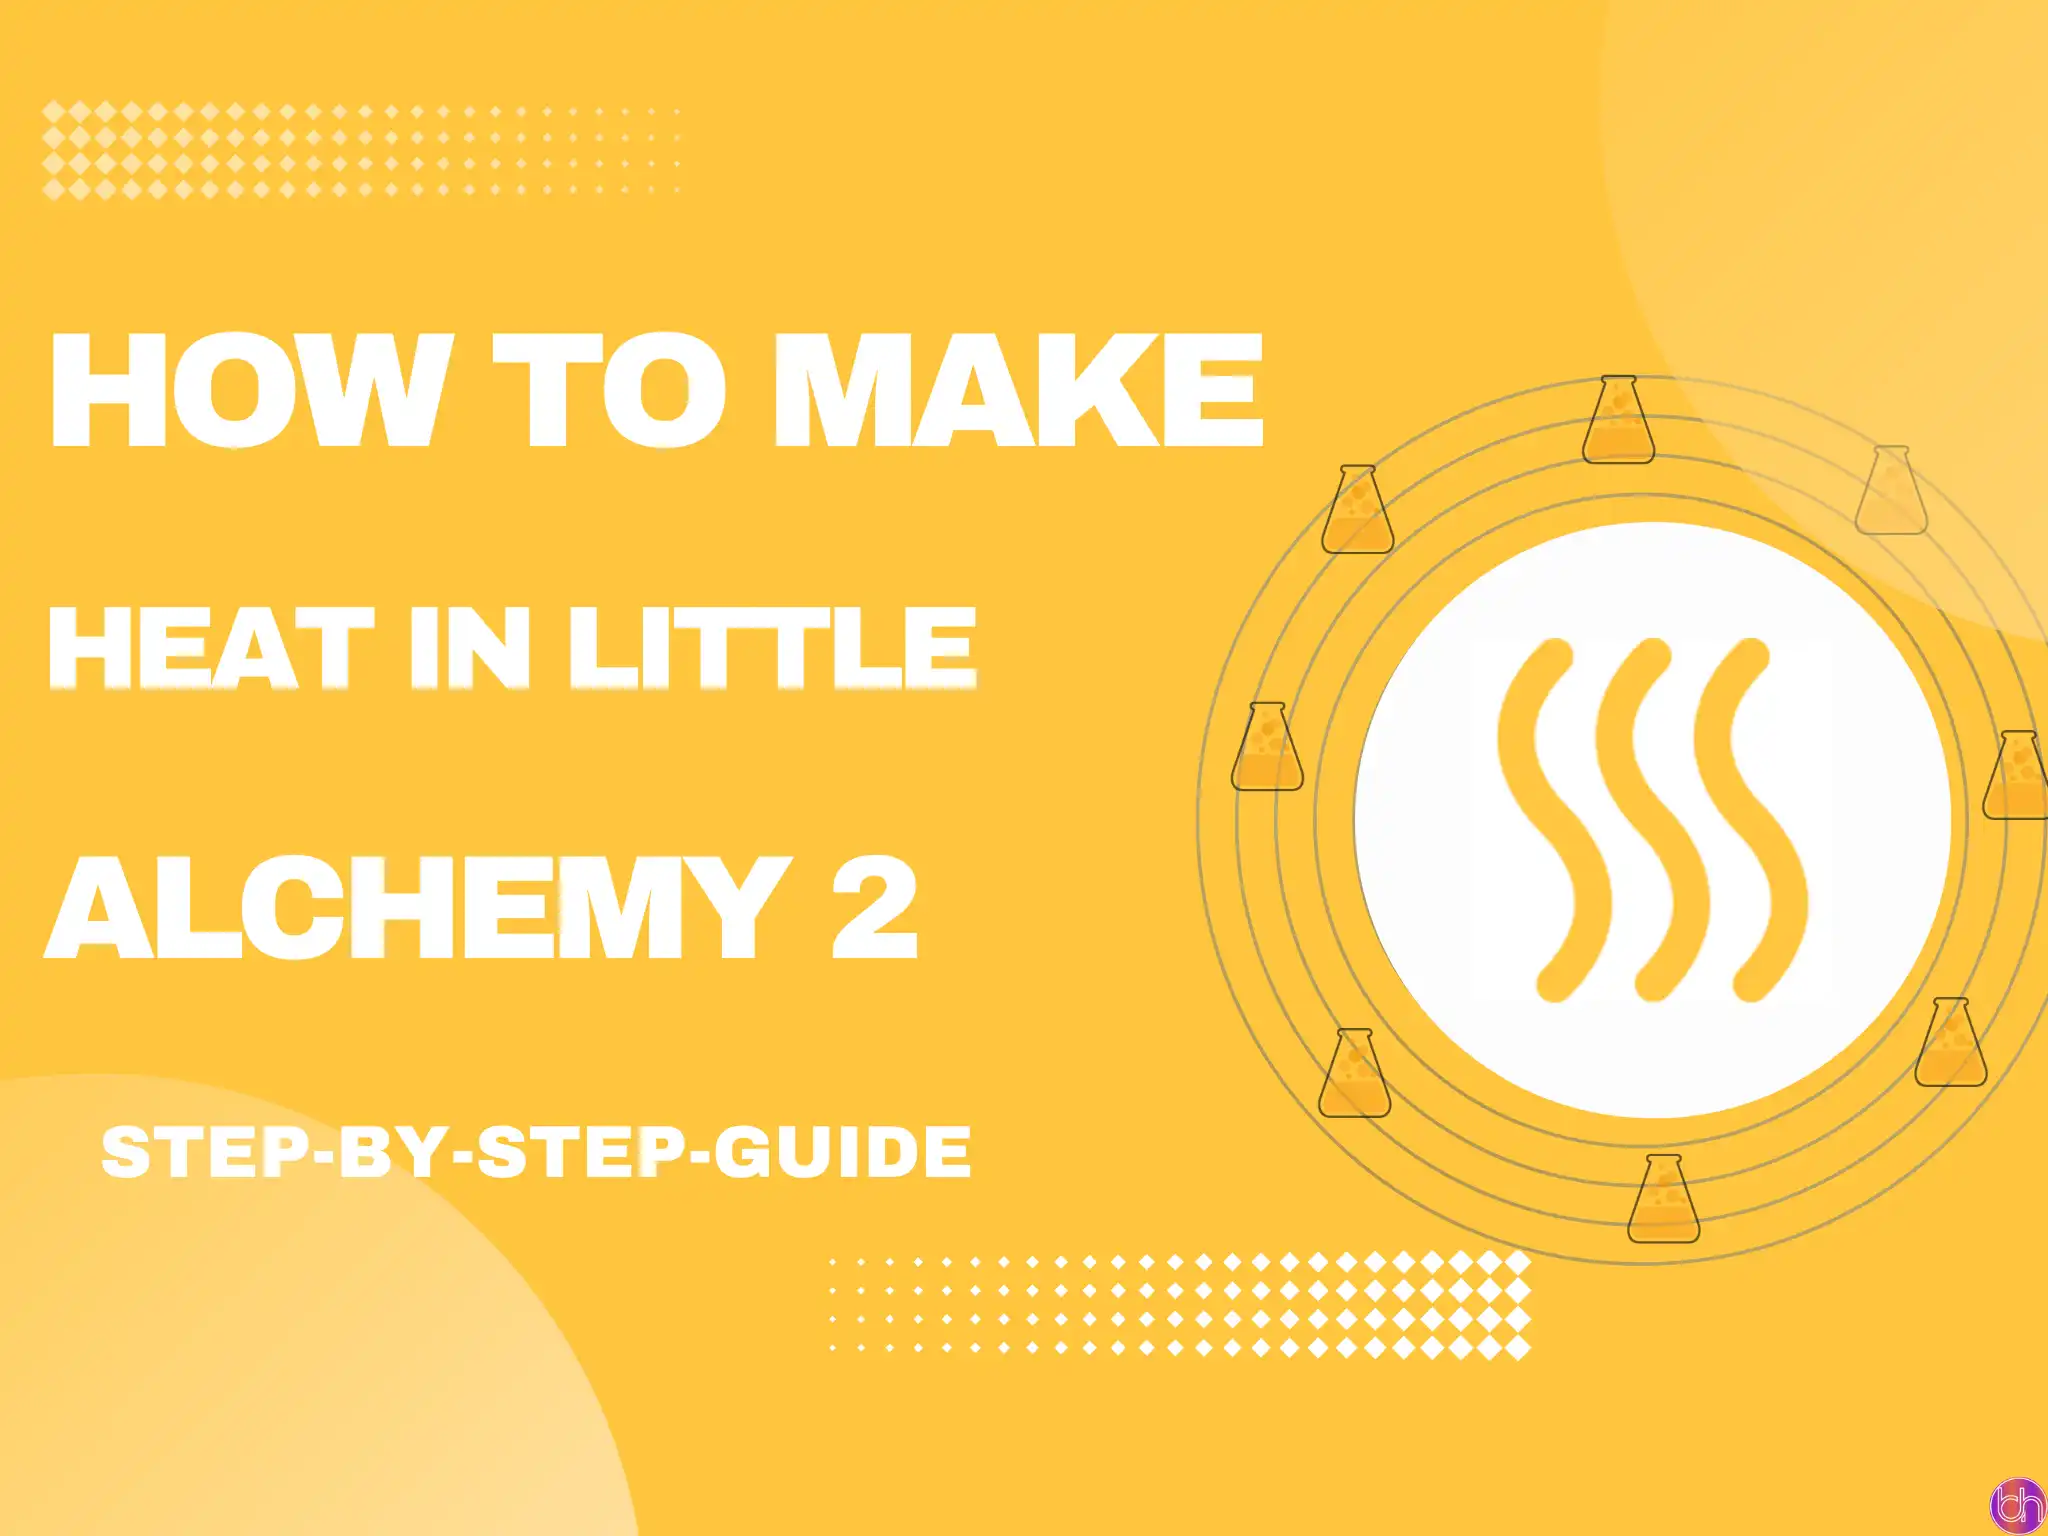 How to make Heat in Little Alchemy 2